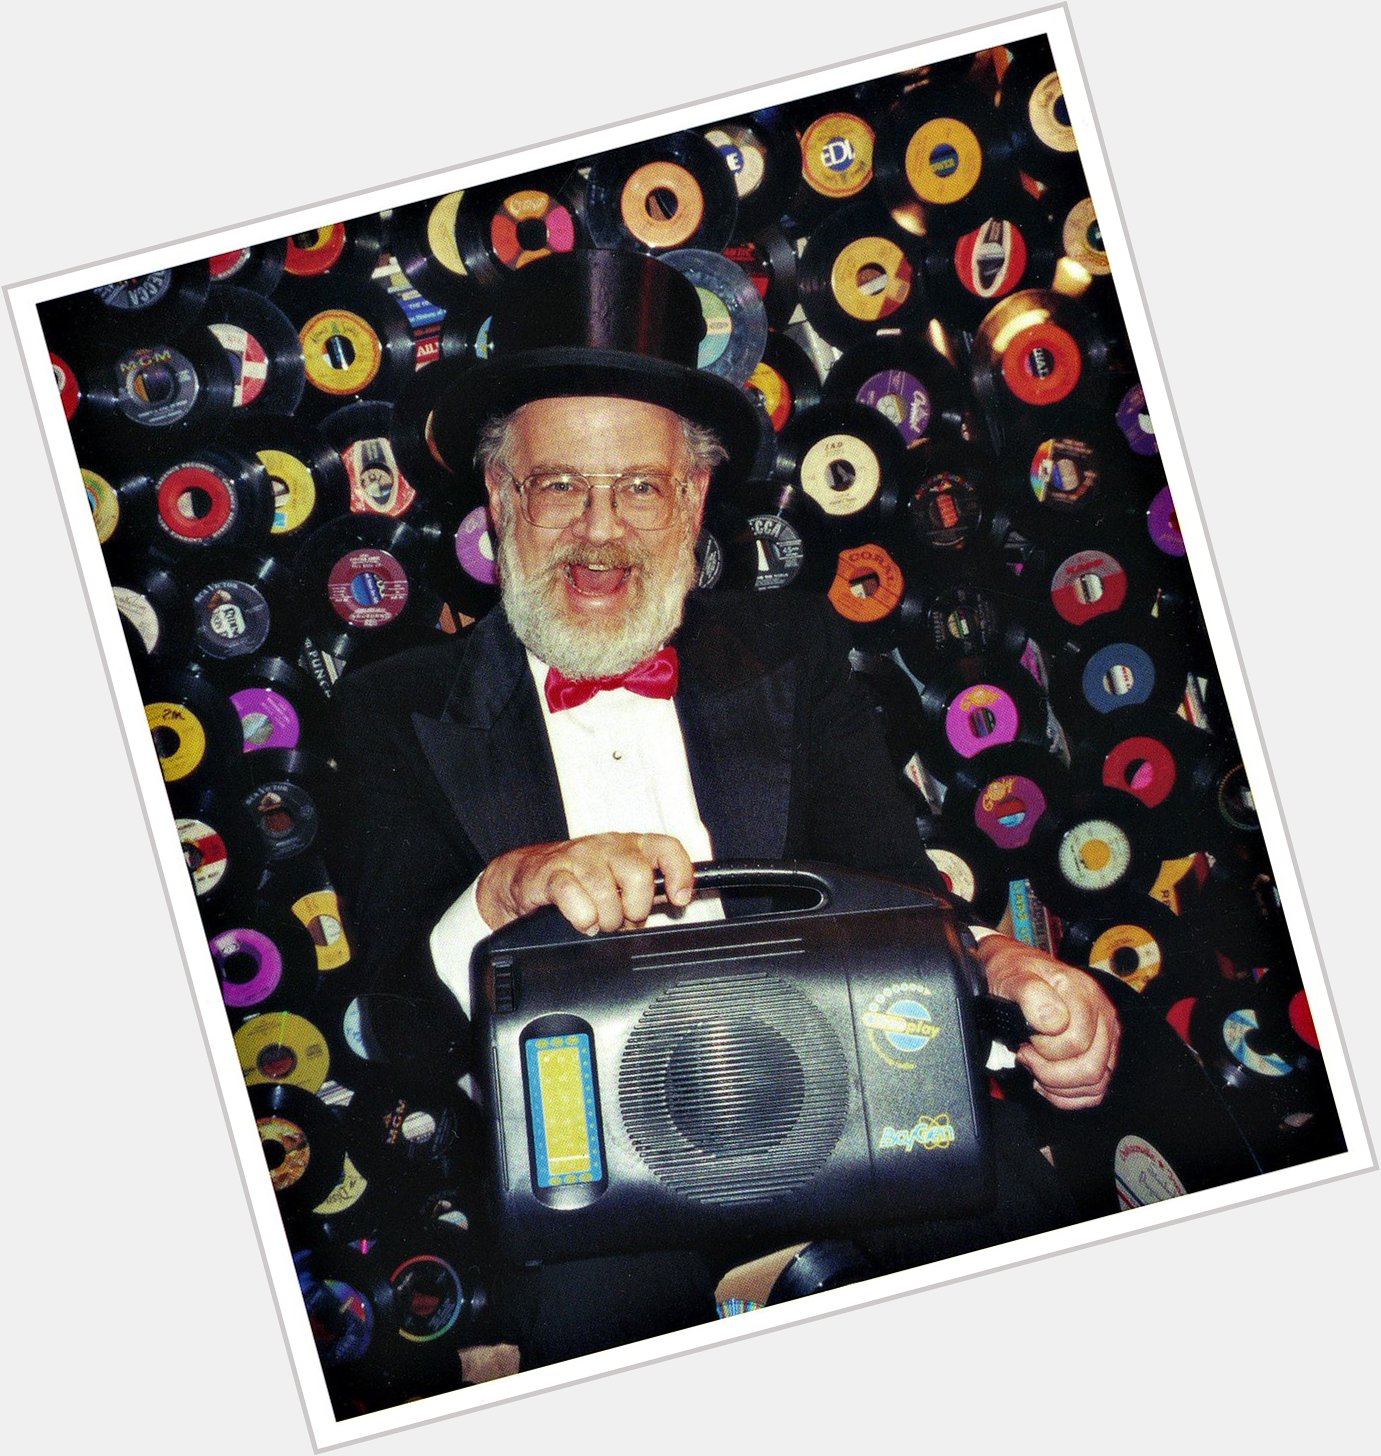 HAPPY 80th BIRTHDAY
TO ONE OF MY HEROES 
Dr. Demento !!  